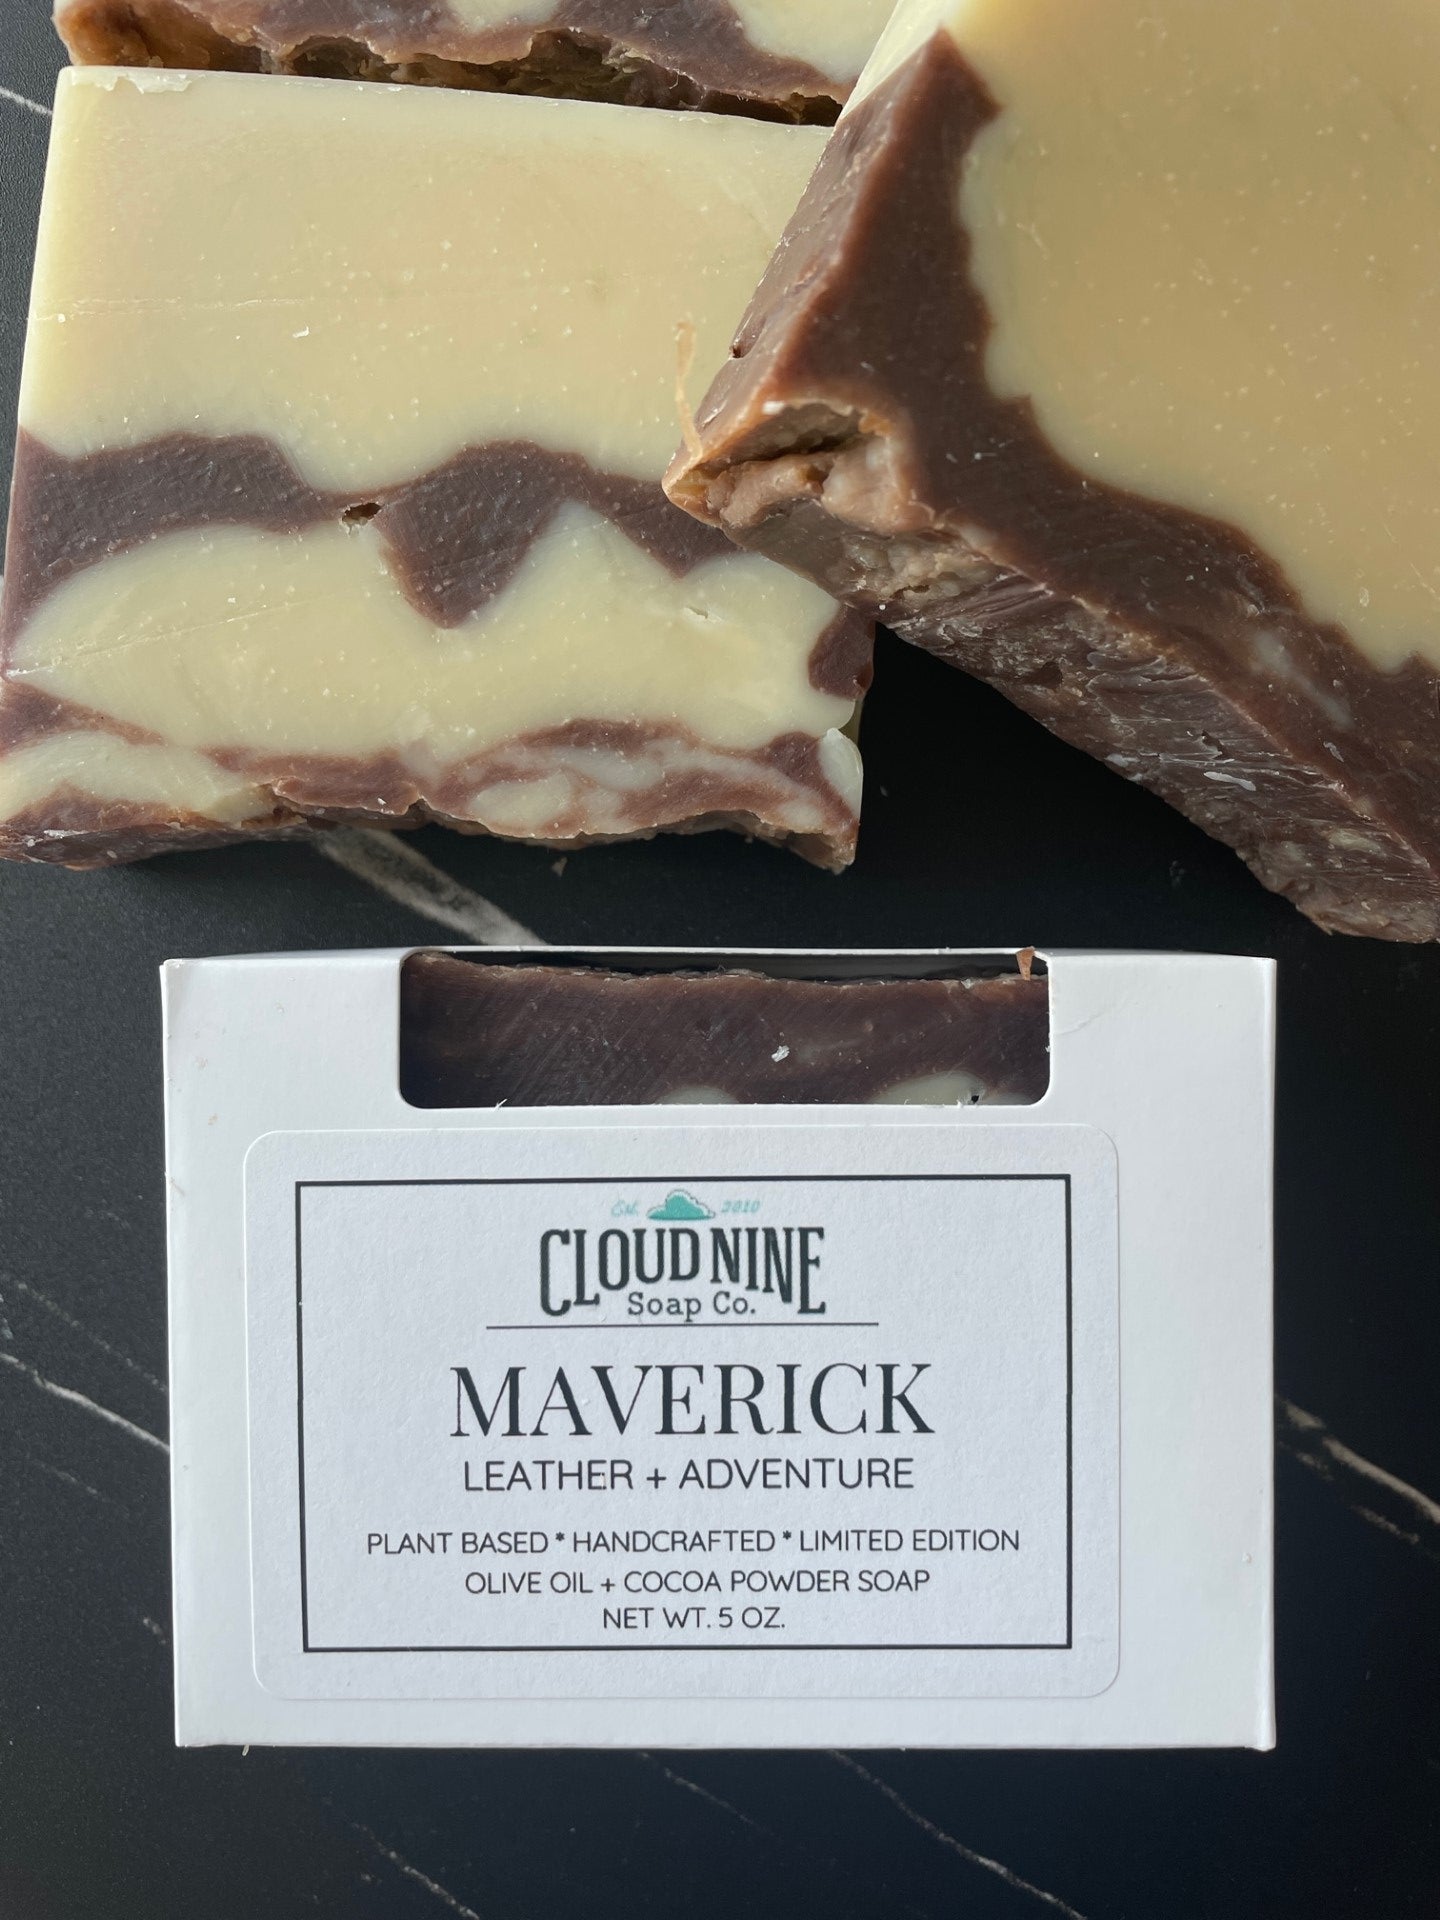 NEW! Limited Edition Maverick Soap: Leather + Adventure (a C9SC Orginal Scent from 2013)